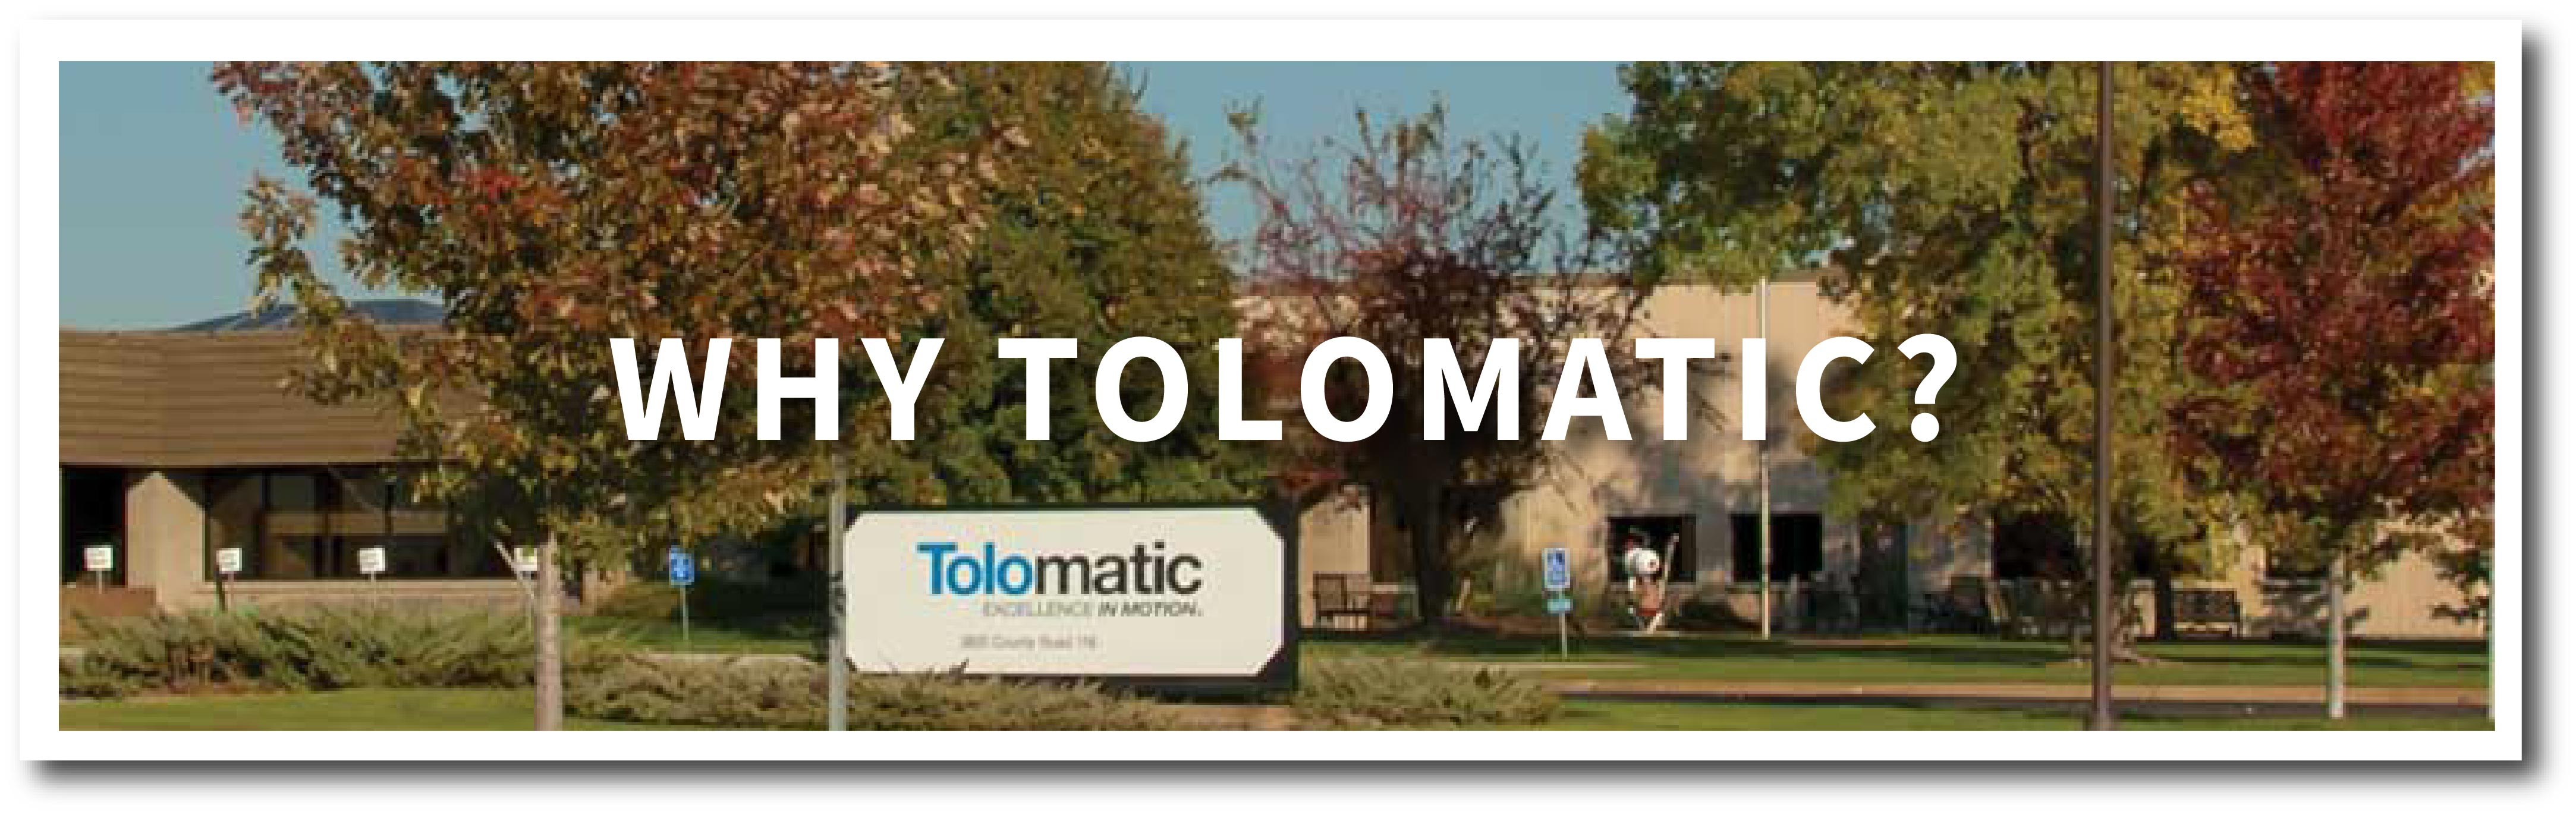 Why use Tolomatic Actuators